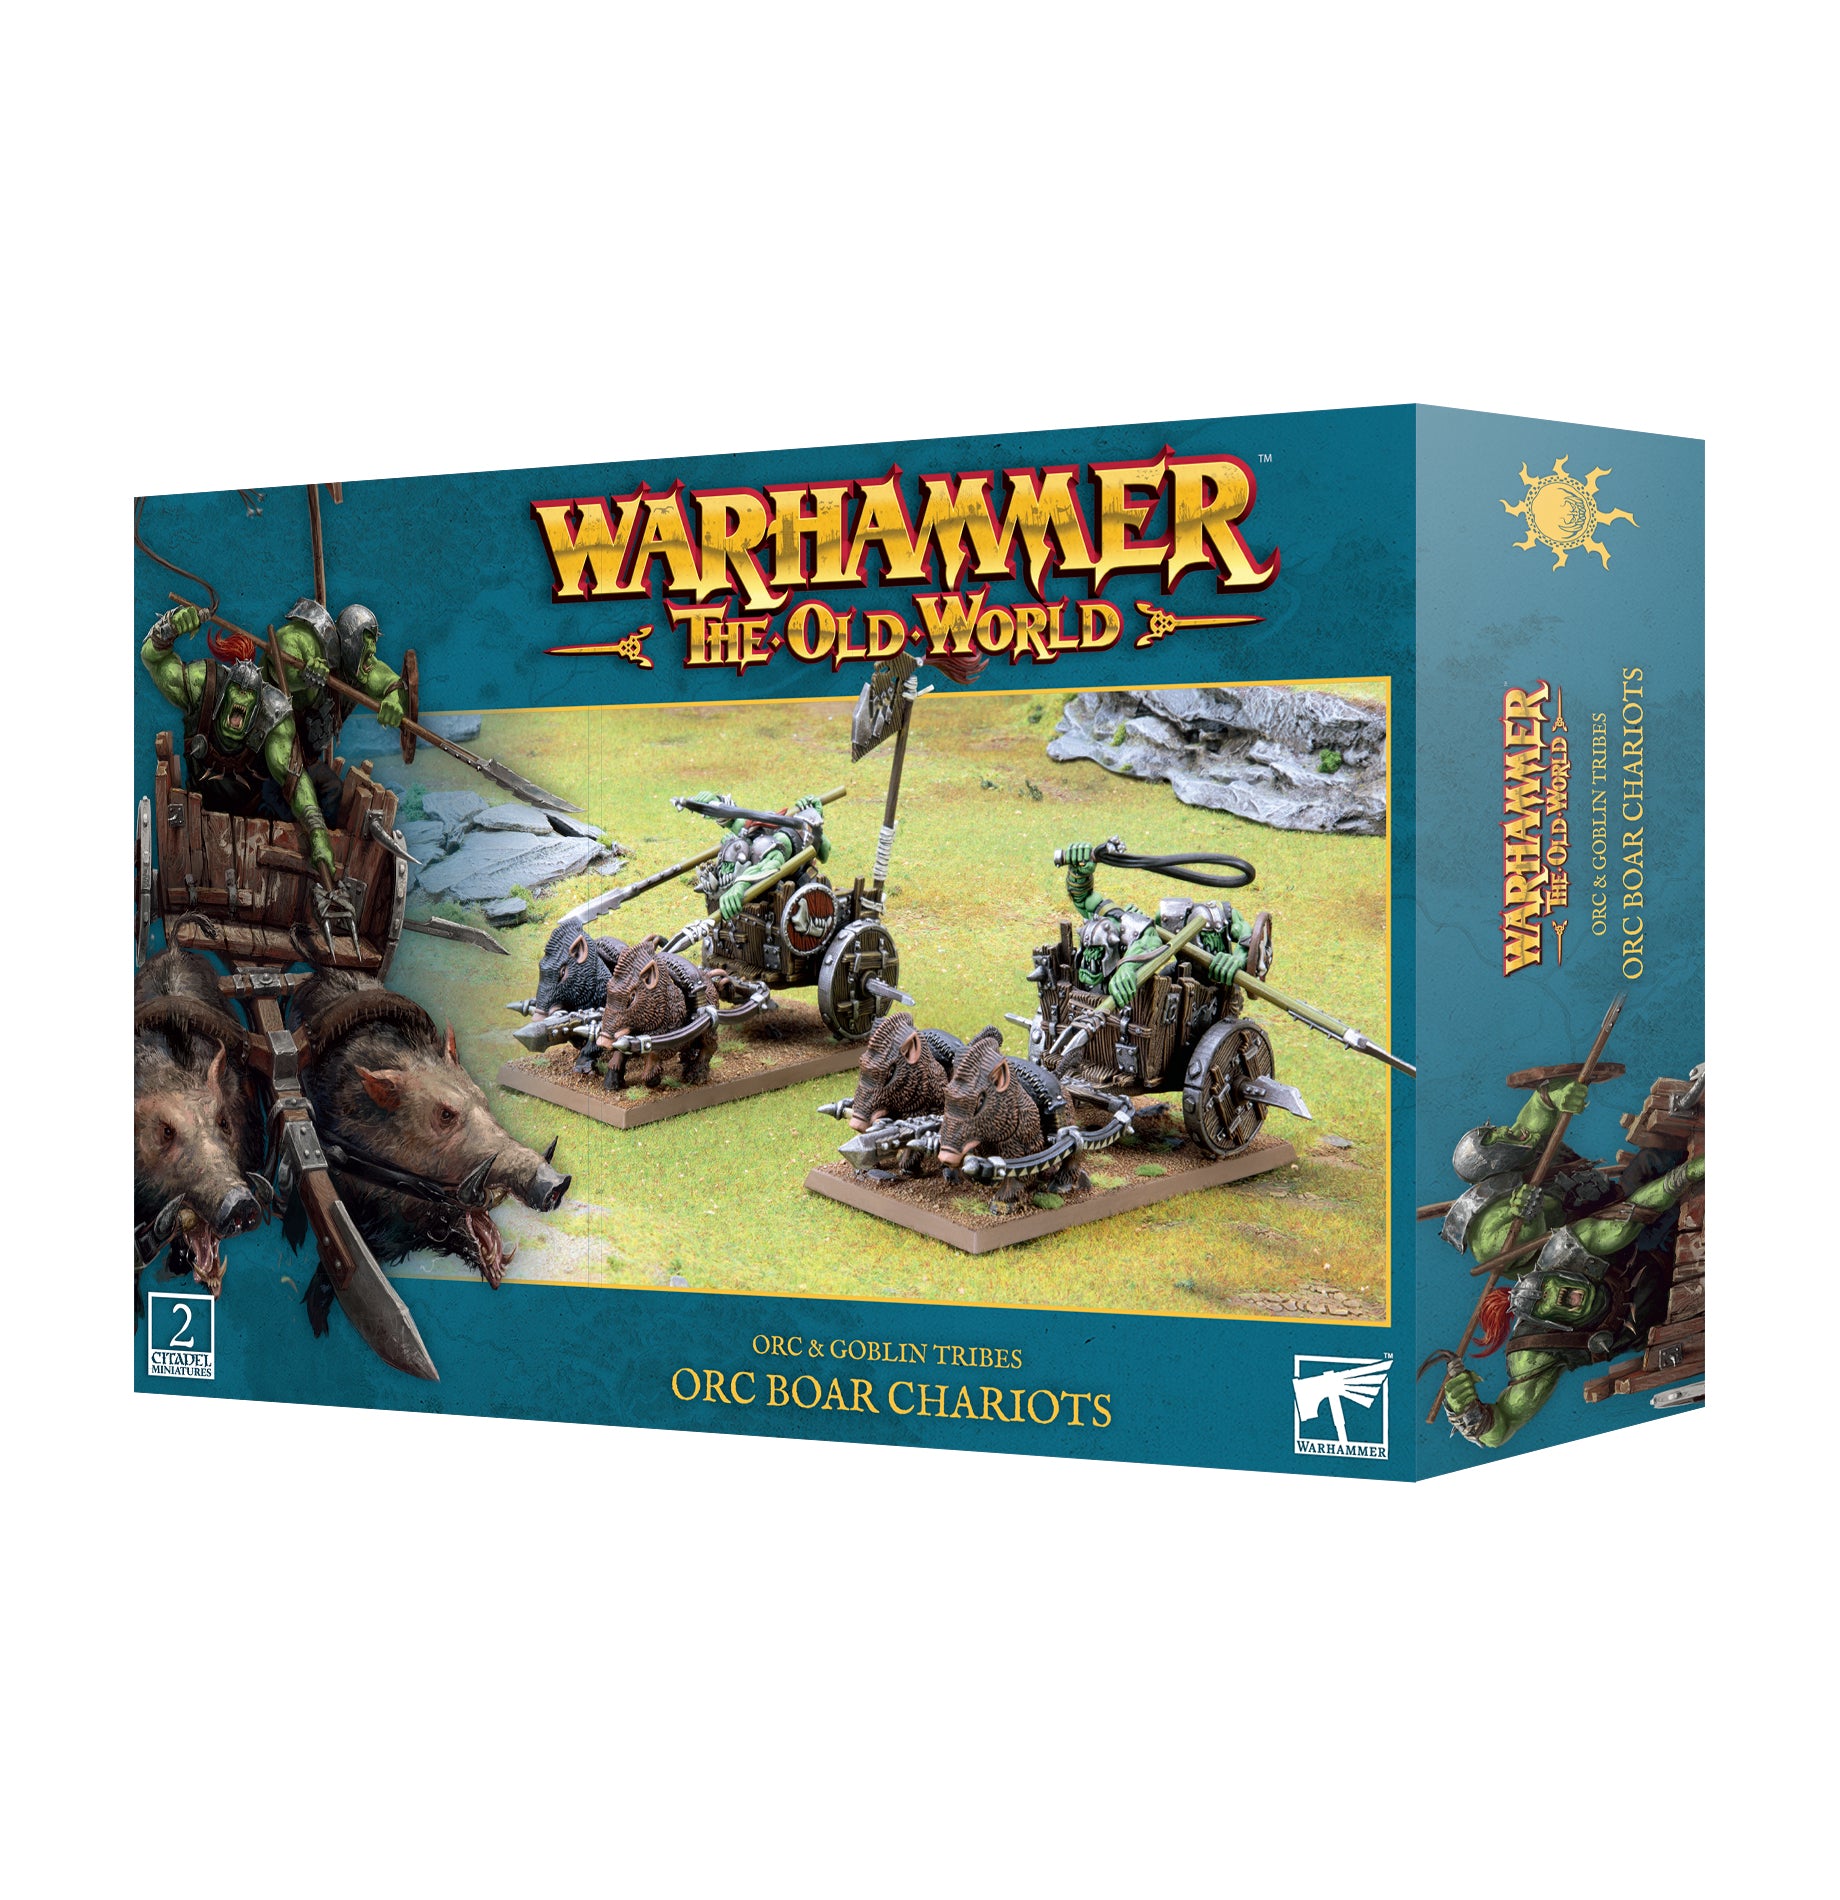 OLD WORLD: ORC & GOBLIN TRIBES: ORC BOAR CHARIOTS | Impulse Games and Hobbies